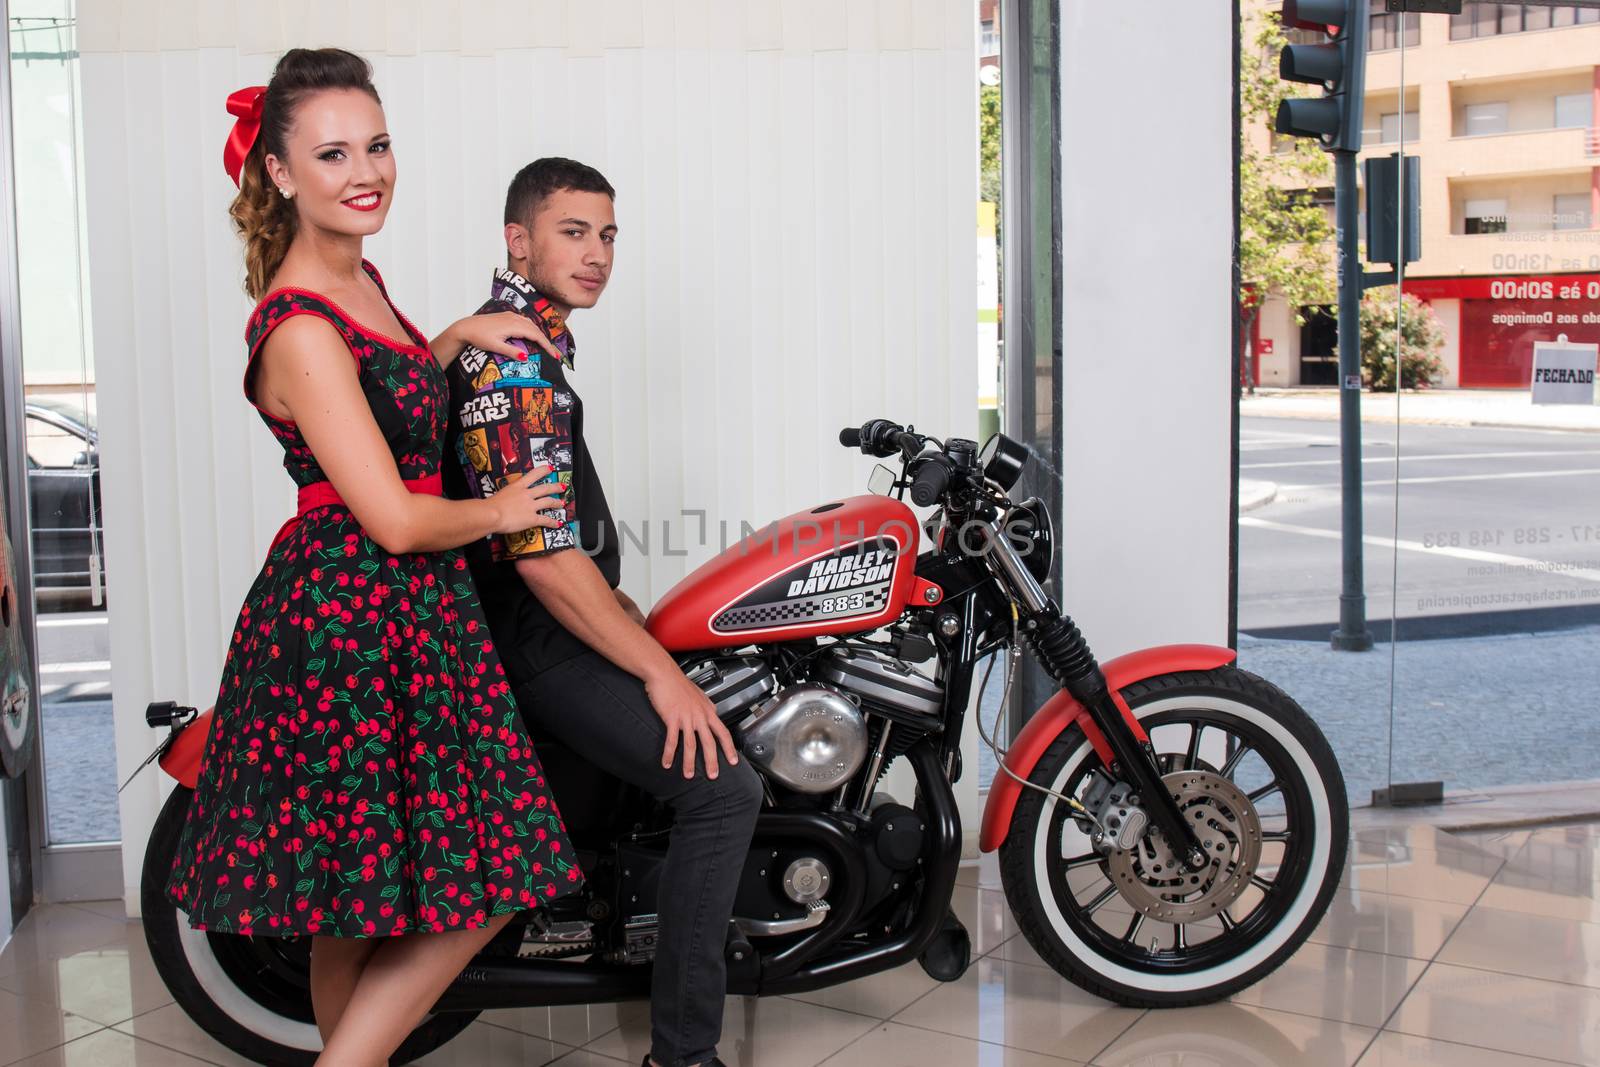 Vintage couple in a motorbike by membio